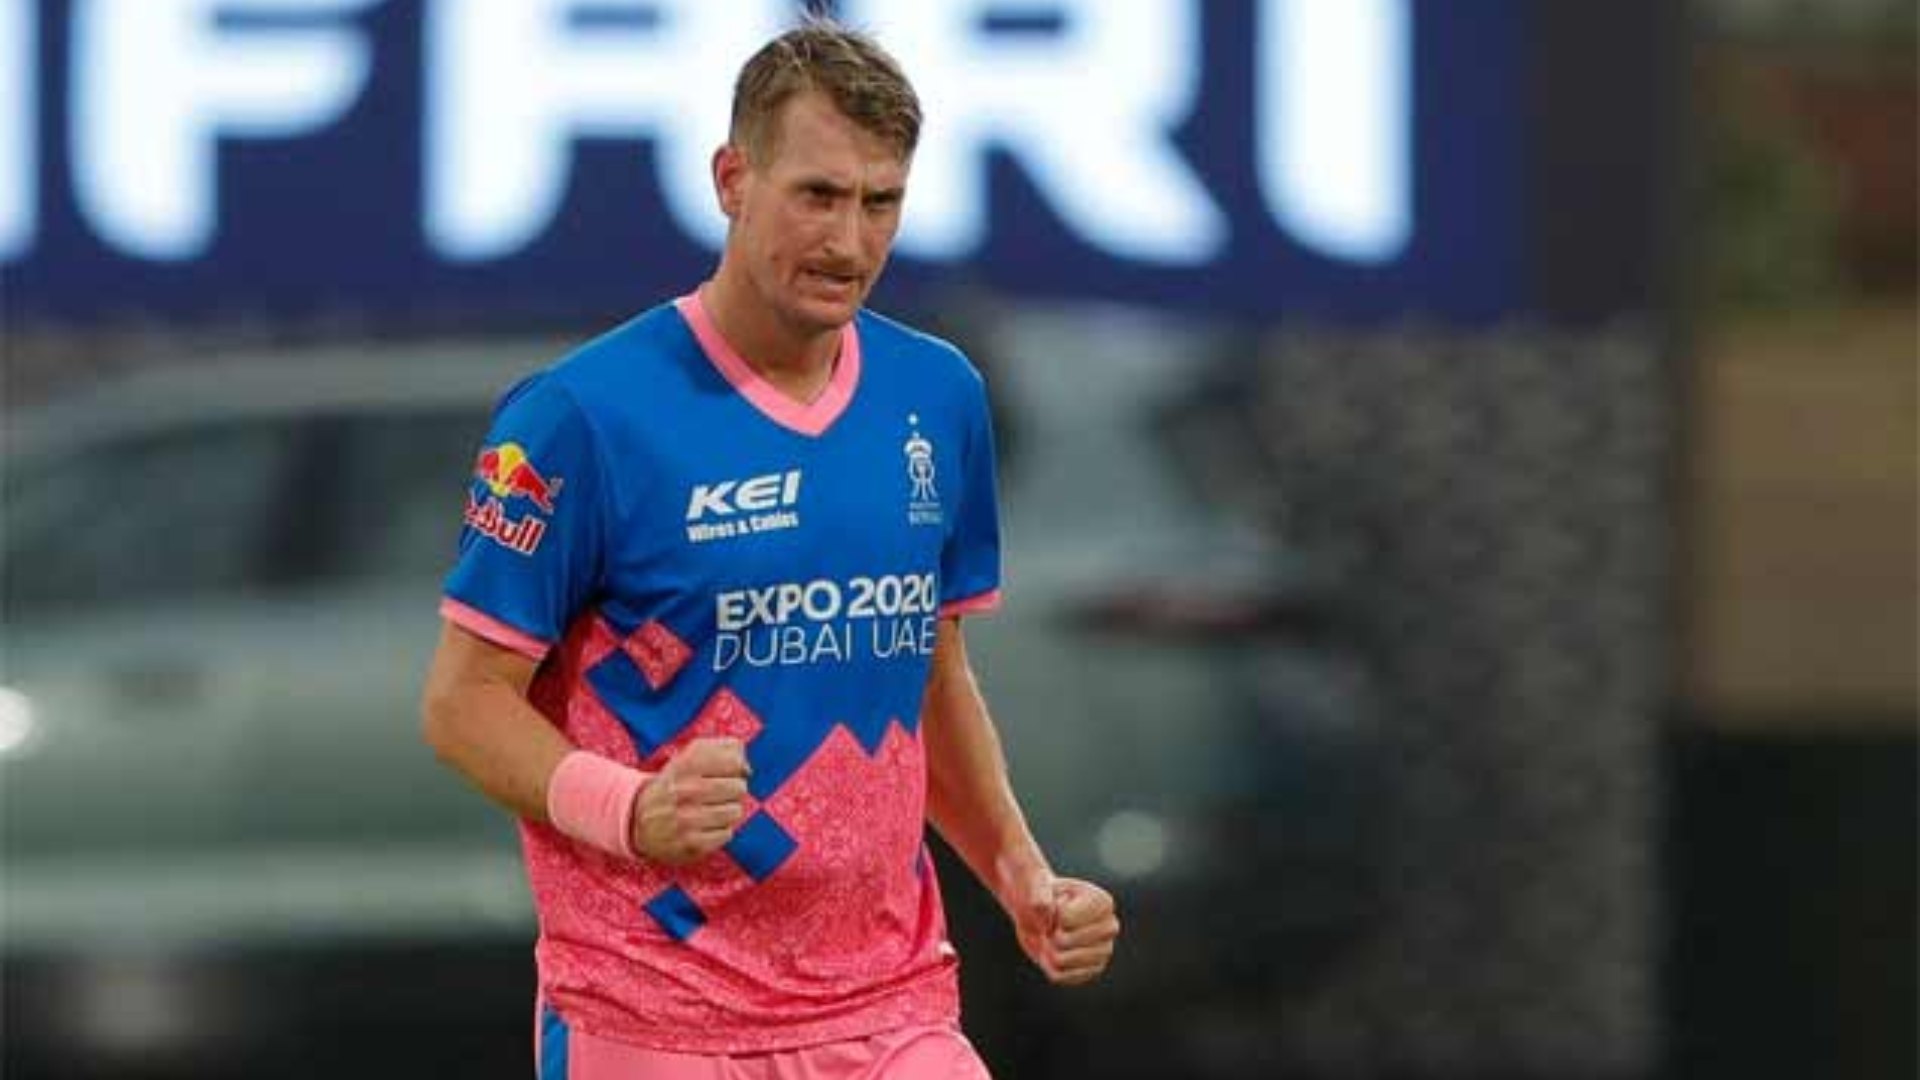 Rajasthan Royals' Chris Morris has said the situation was 'chaotic' and playing IPL 2021 posed a moral dilemma for him.